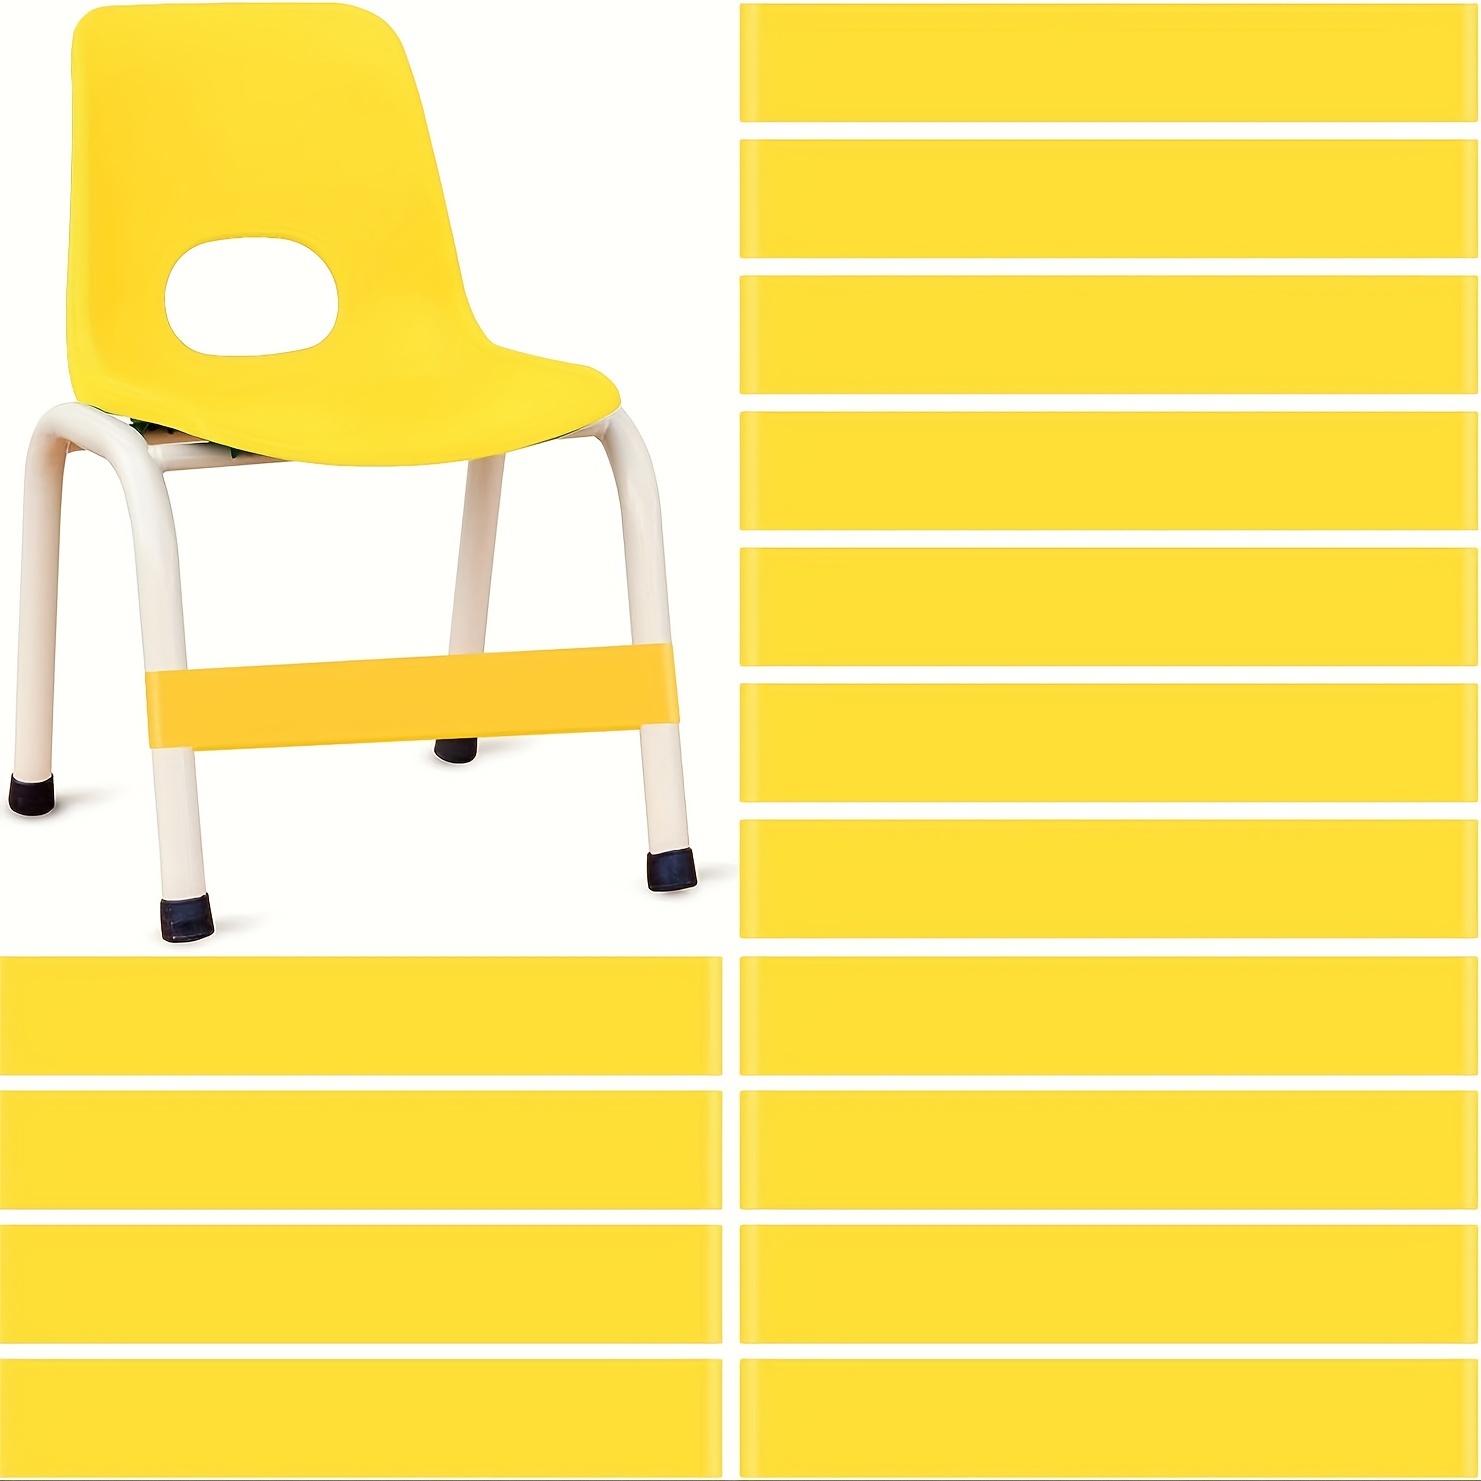 Chair Bands For Students With Fidgety Feet Fidget Chair - Temu